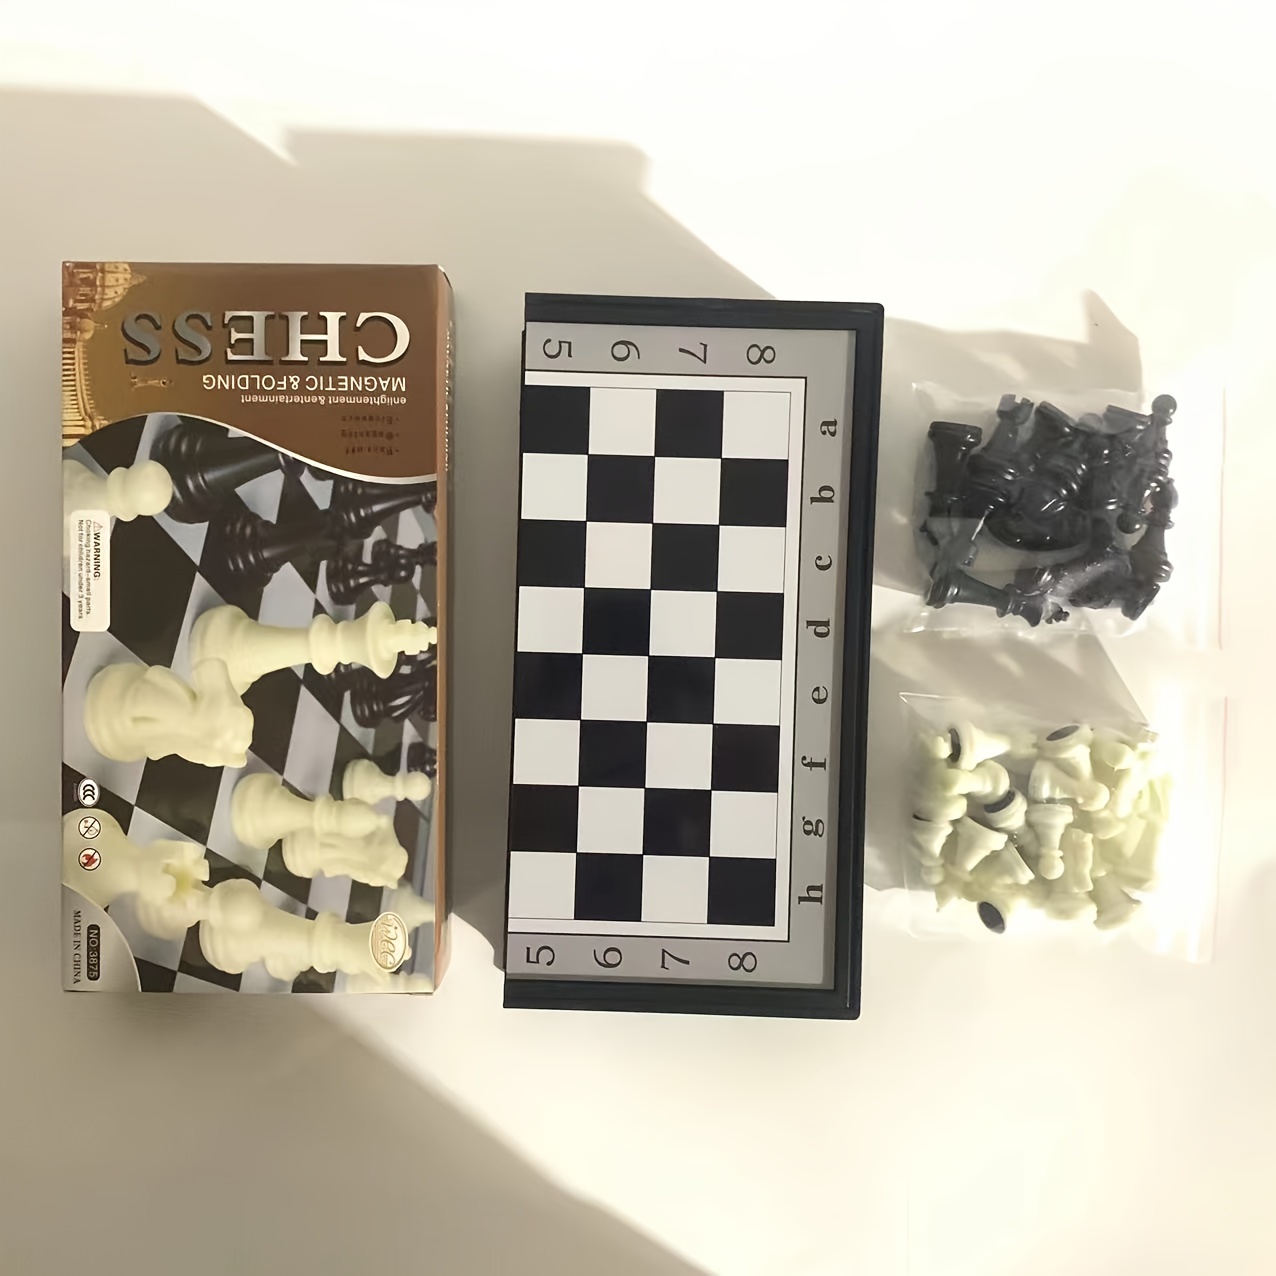 

Family Reunion Chess Set - Medium Size, Perfect For Easter & Mother's Day Gifts, Ages 3-6, Durable Abs Material